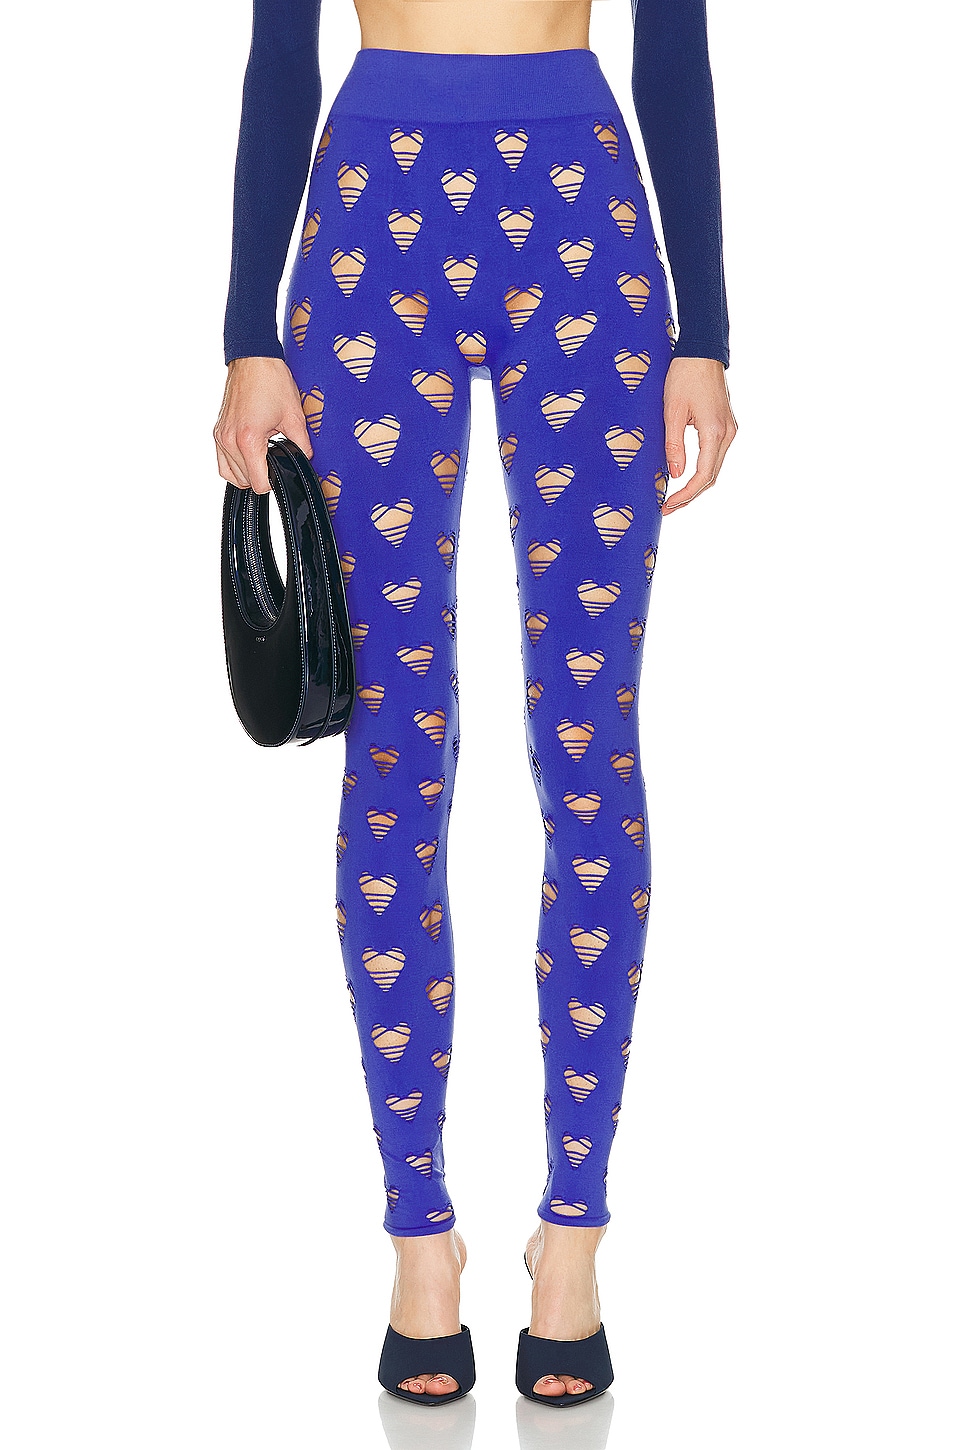 Image 1 of Maisie Wilen Perforated Heart Legging in Midnight